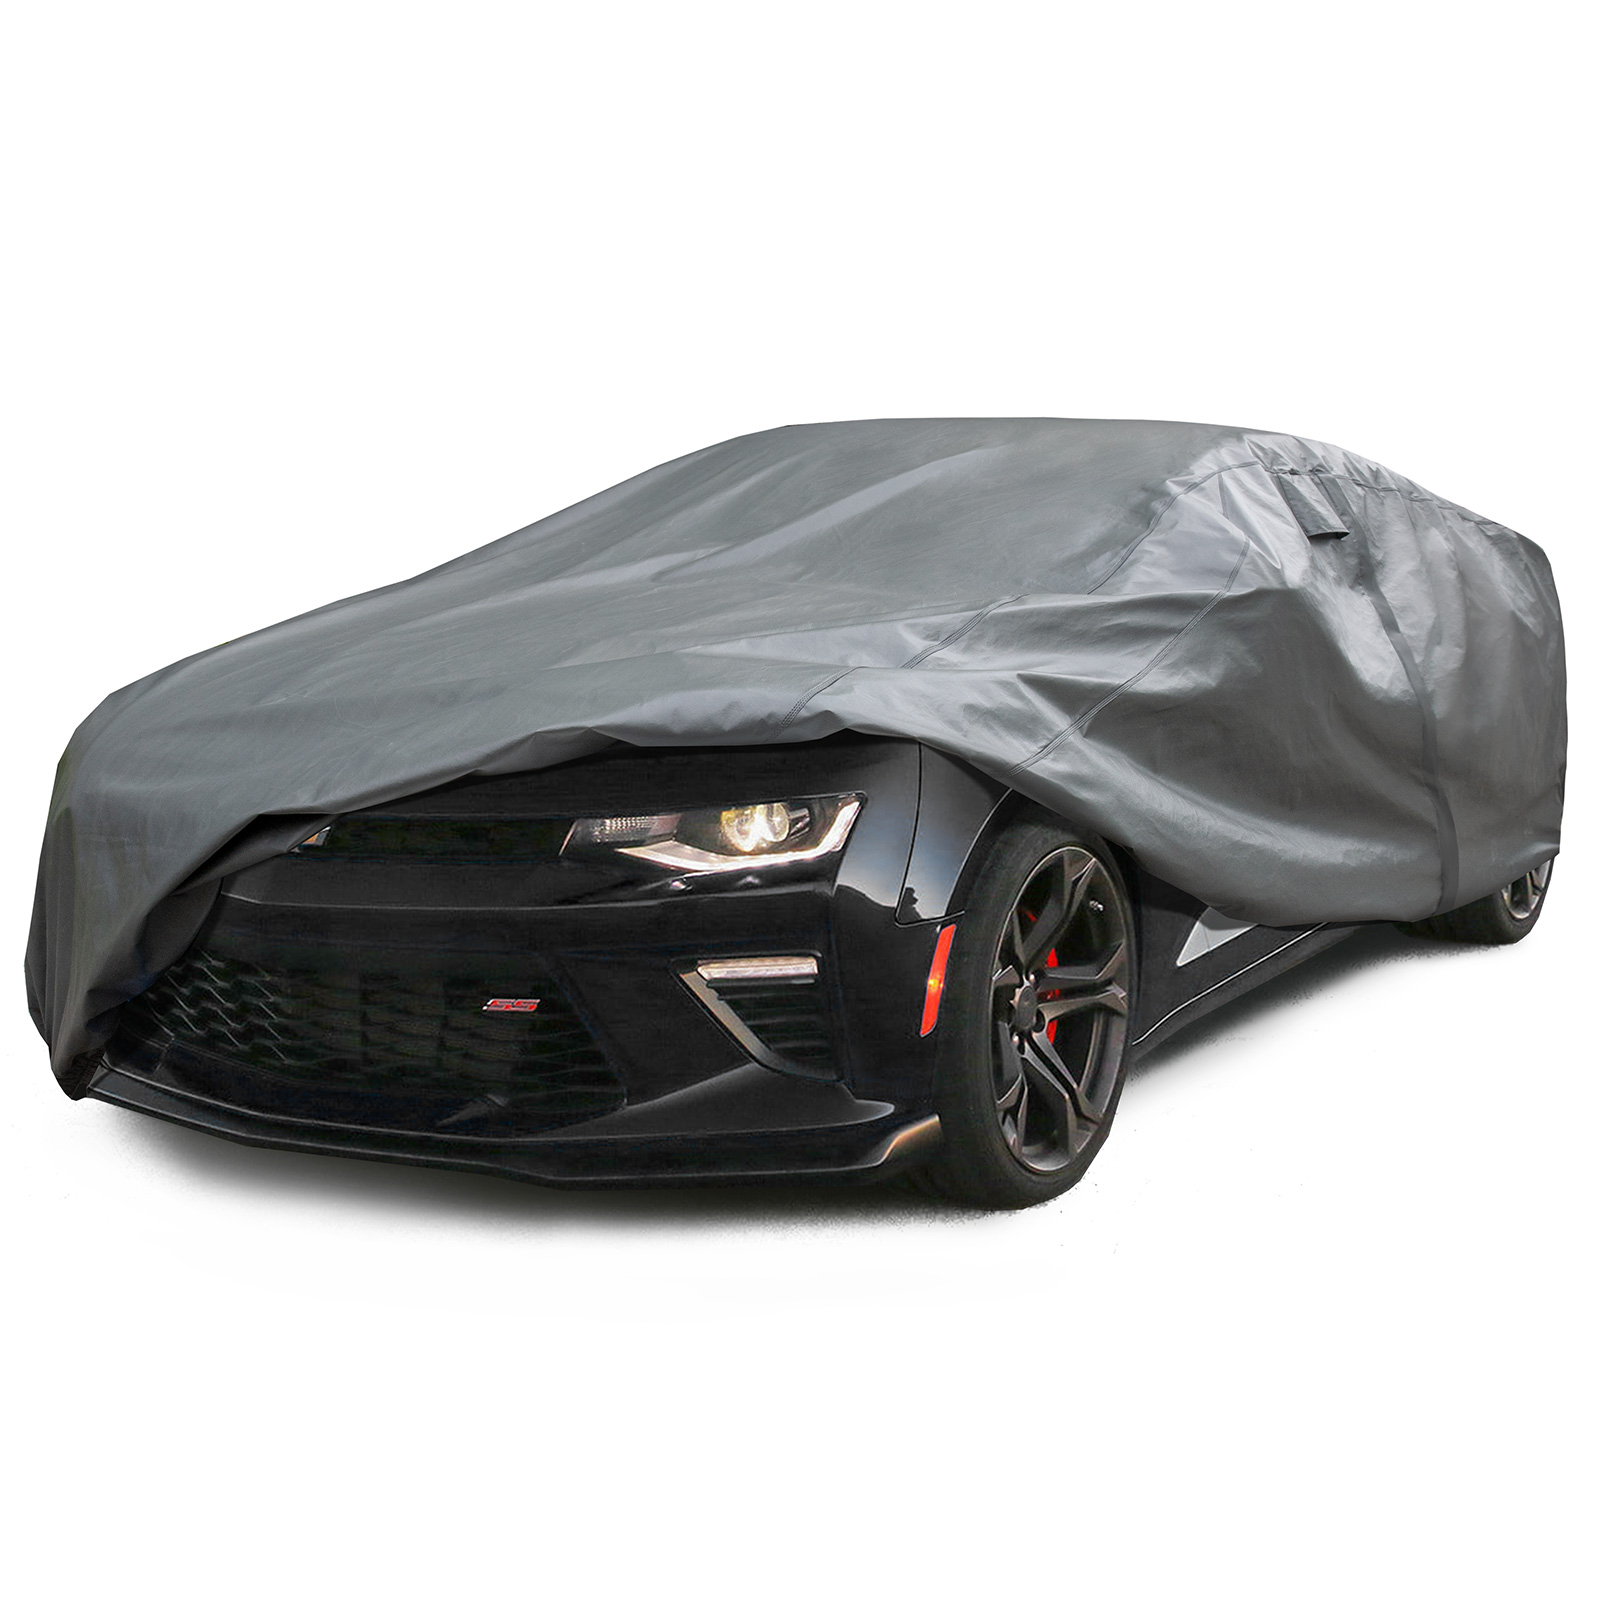 100% Waterproof Car Cover with Zipper Door Two Extra Windproof Tie Down Straps Air Ventilation Window Sedan car cover Featured Image